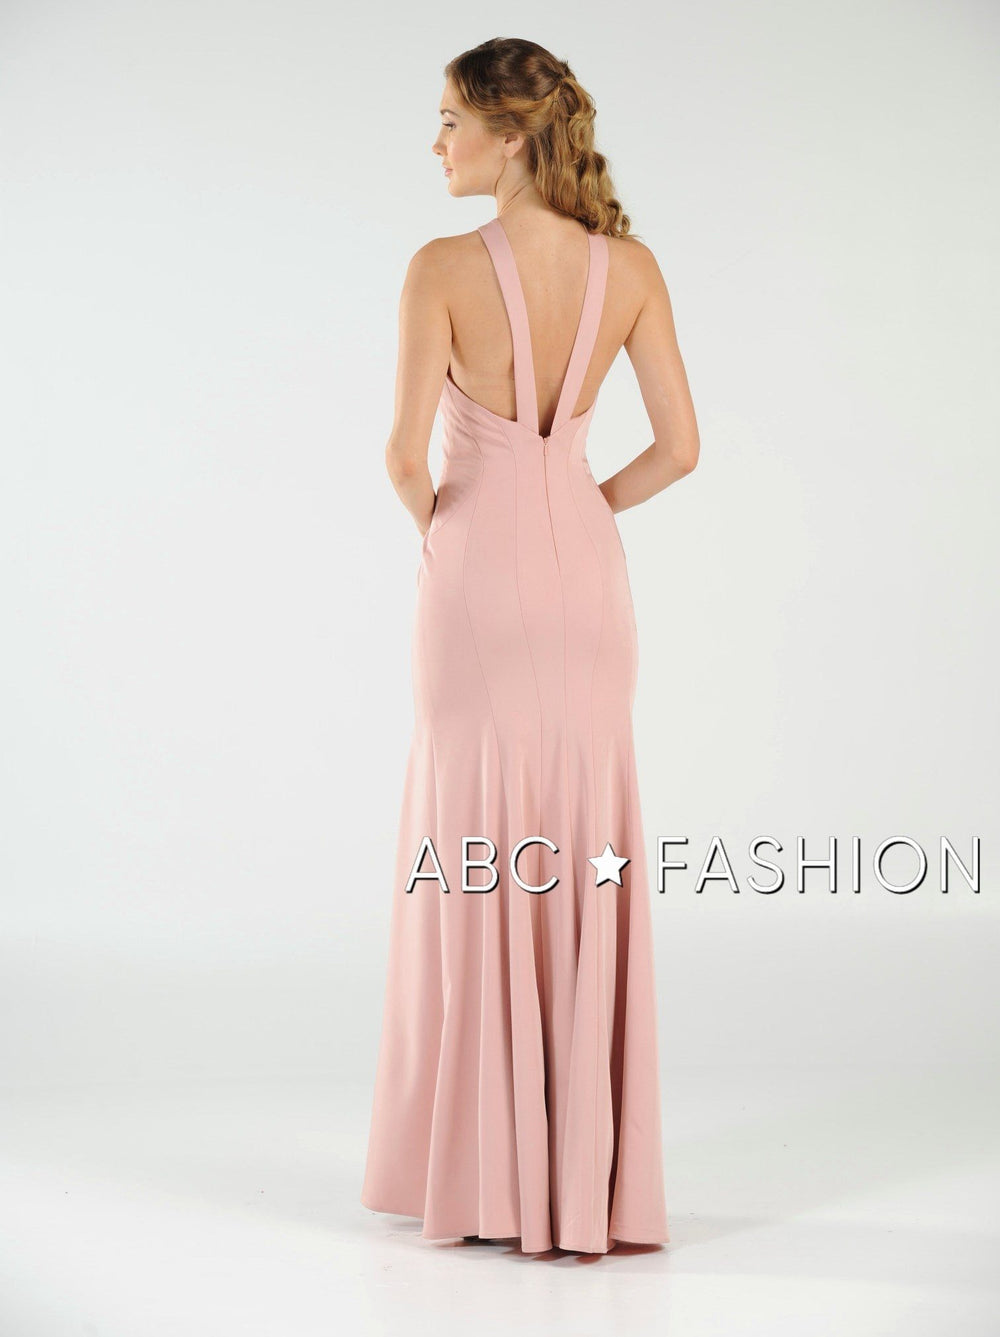 Fit and Flare Long Dress with Keyhole Bodice by Poly USA 8058-Long Formal Dresses-ABC Fashion